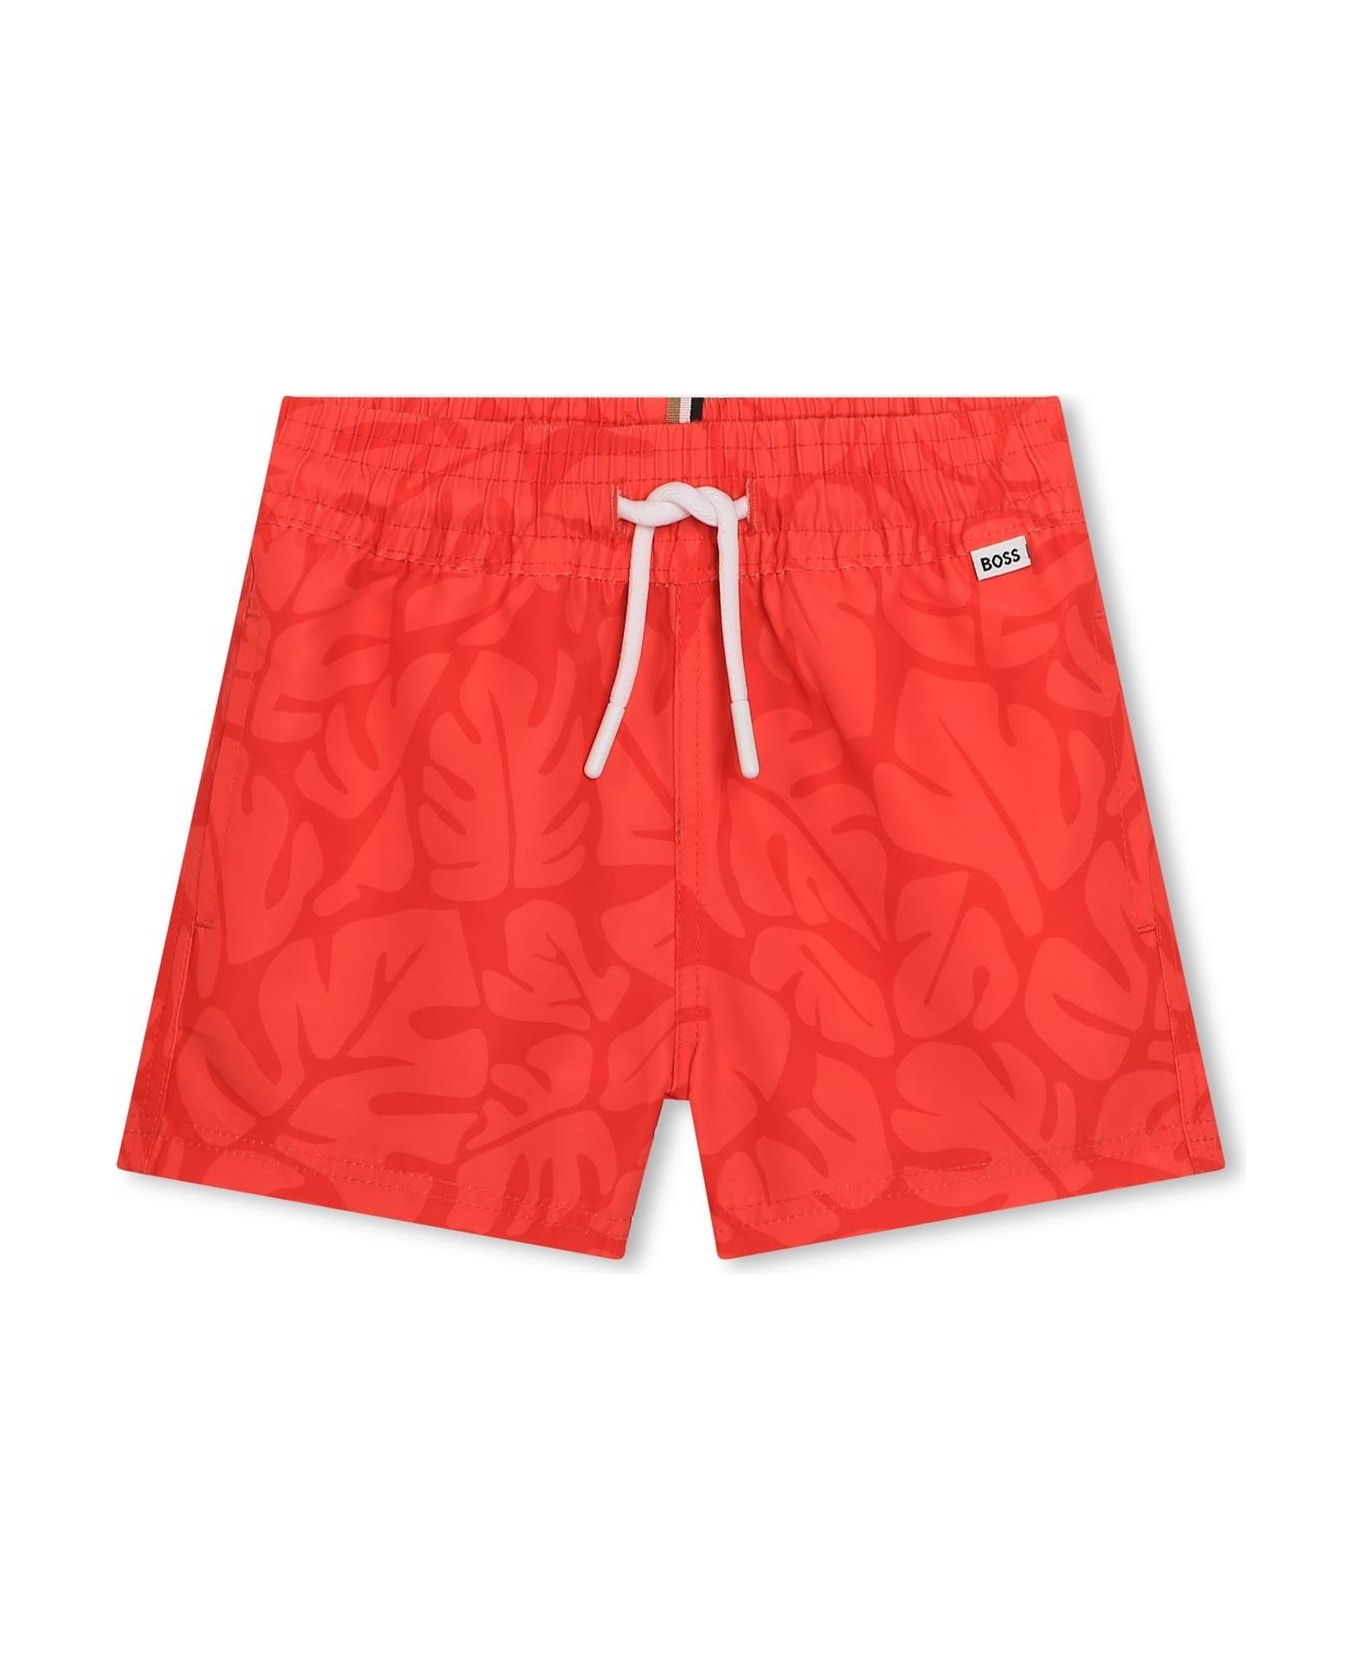 Hugo Boss Swimsuit With Drawstring - Red